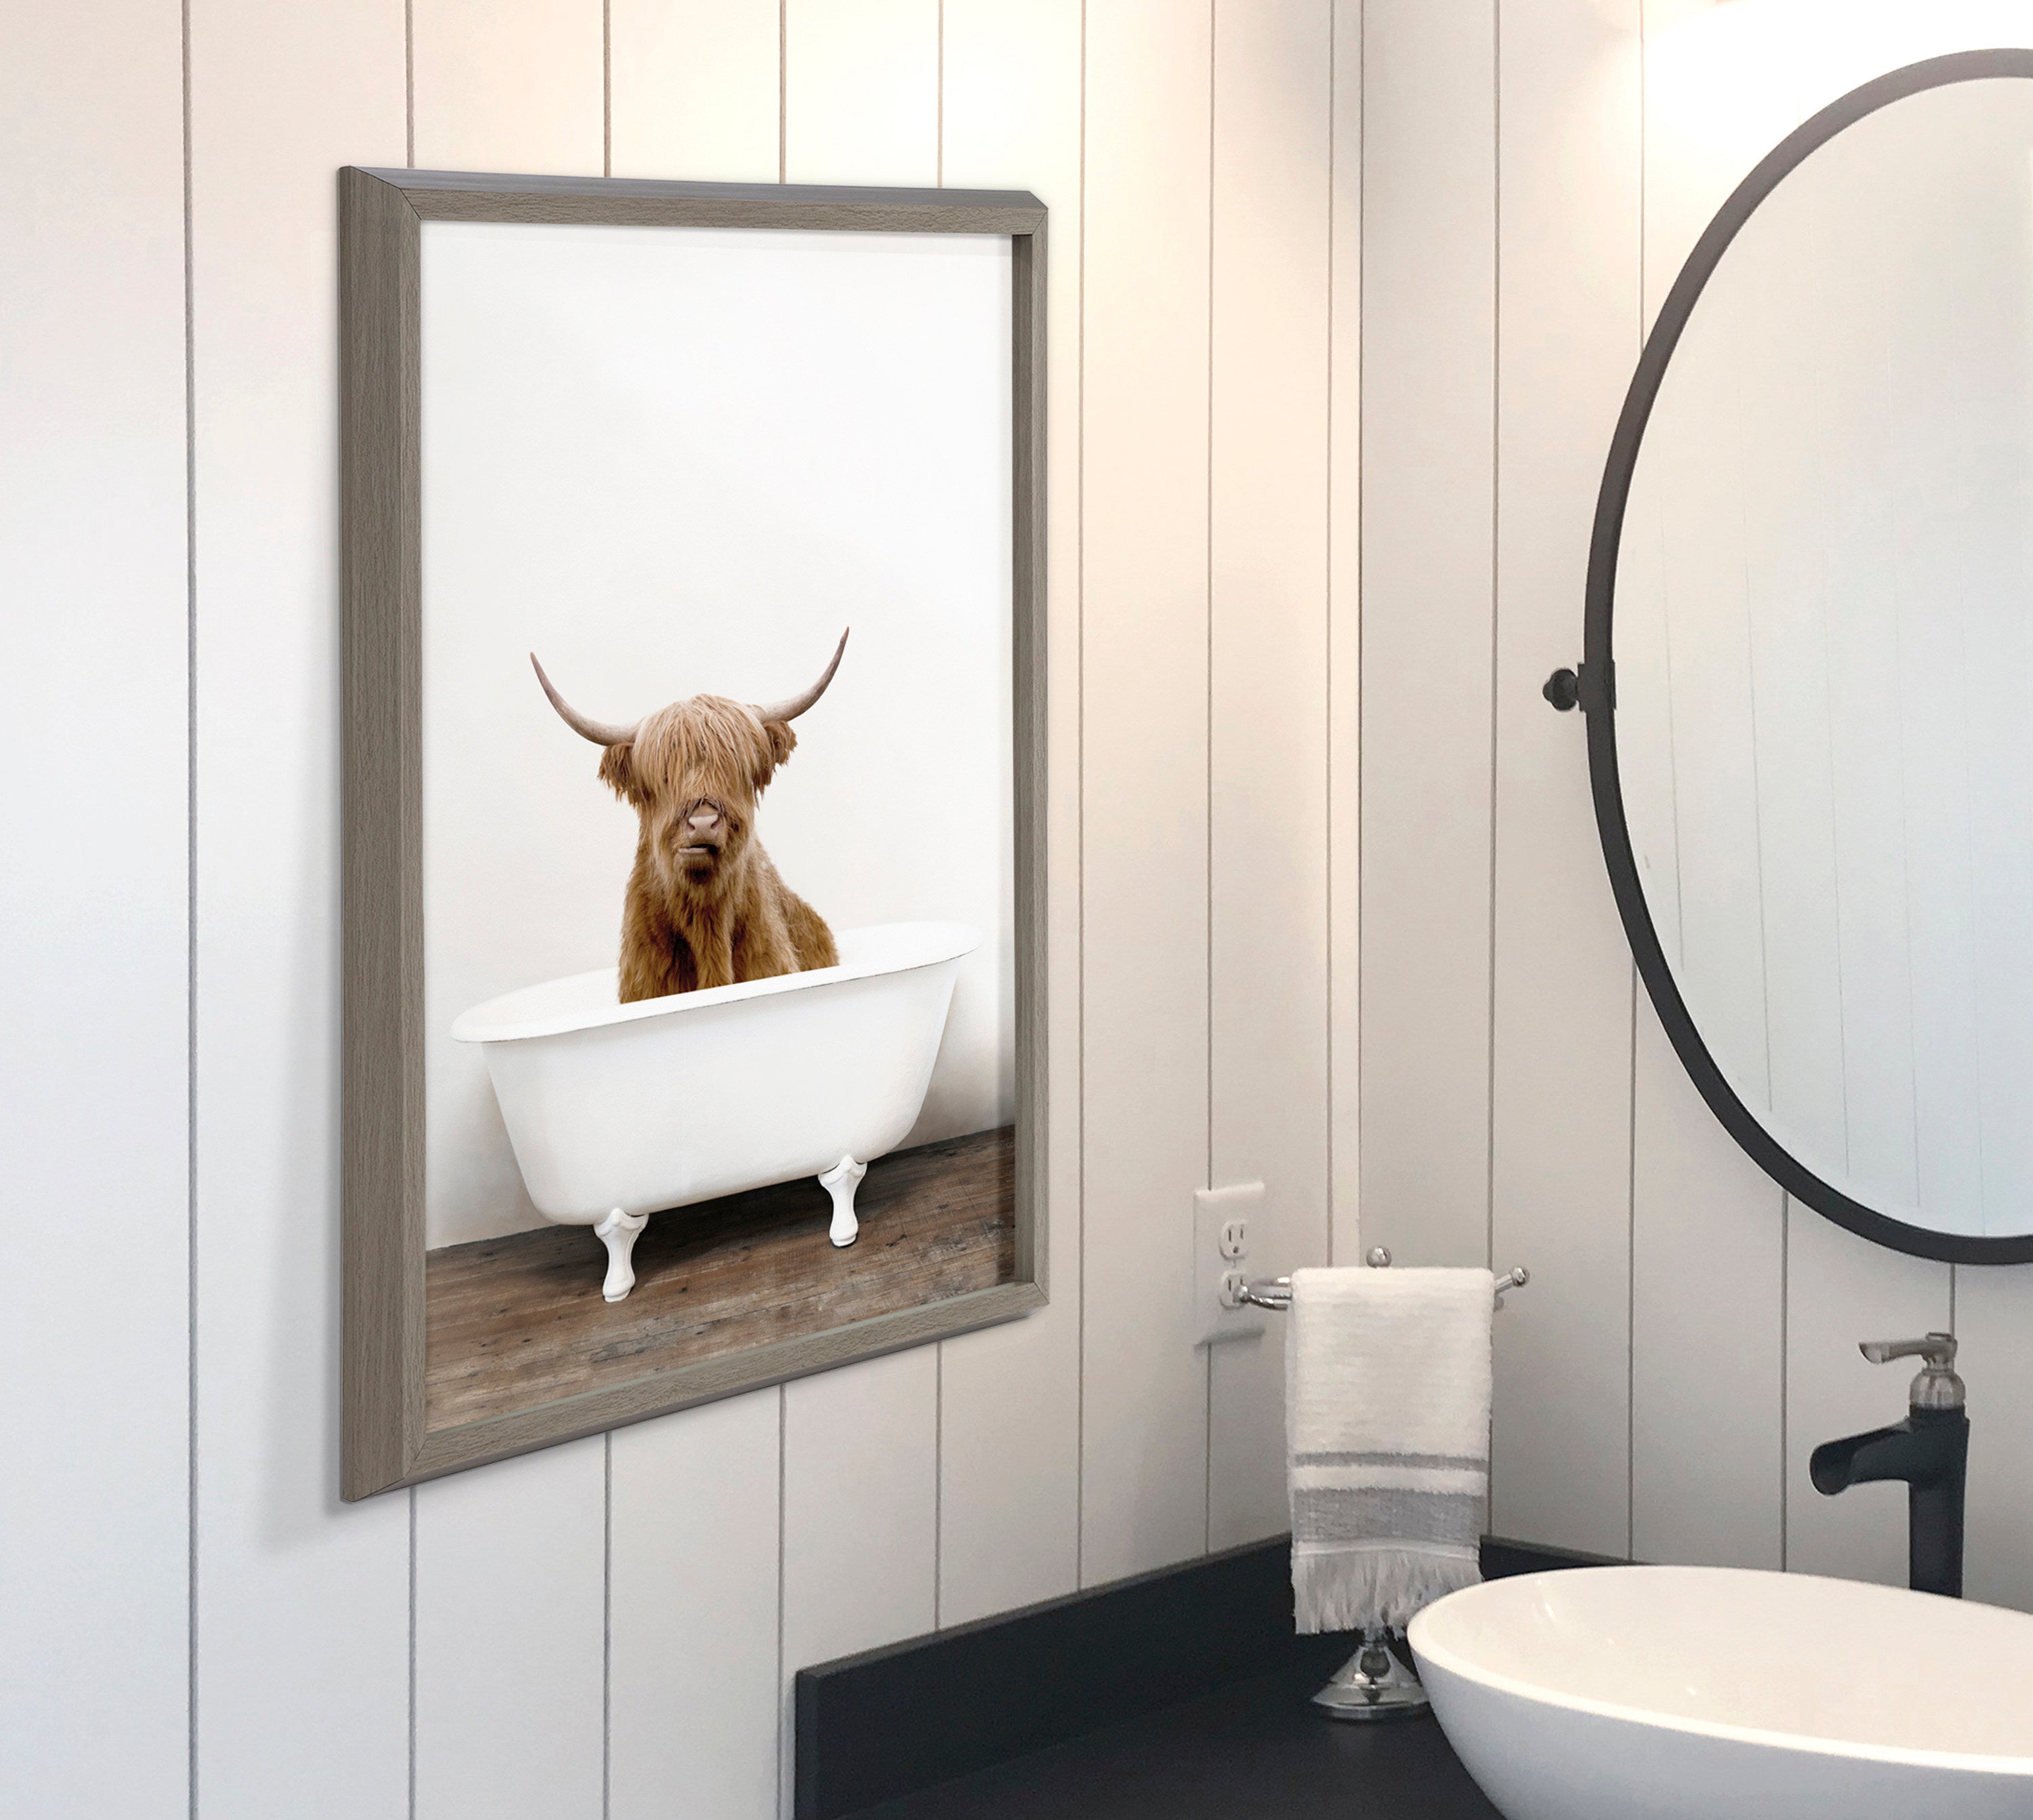 Blake Highland Cow in Tub Color Framed Printed Glass by Amy Peterson Art Studio